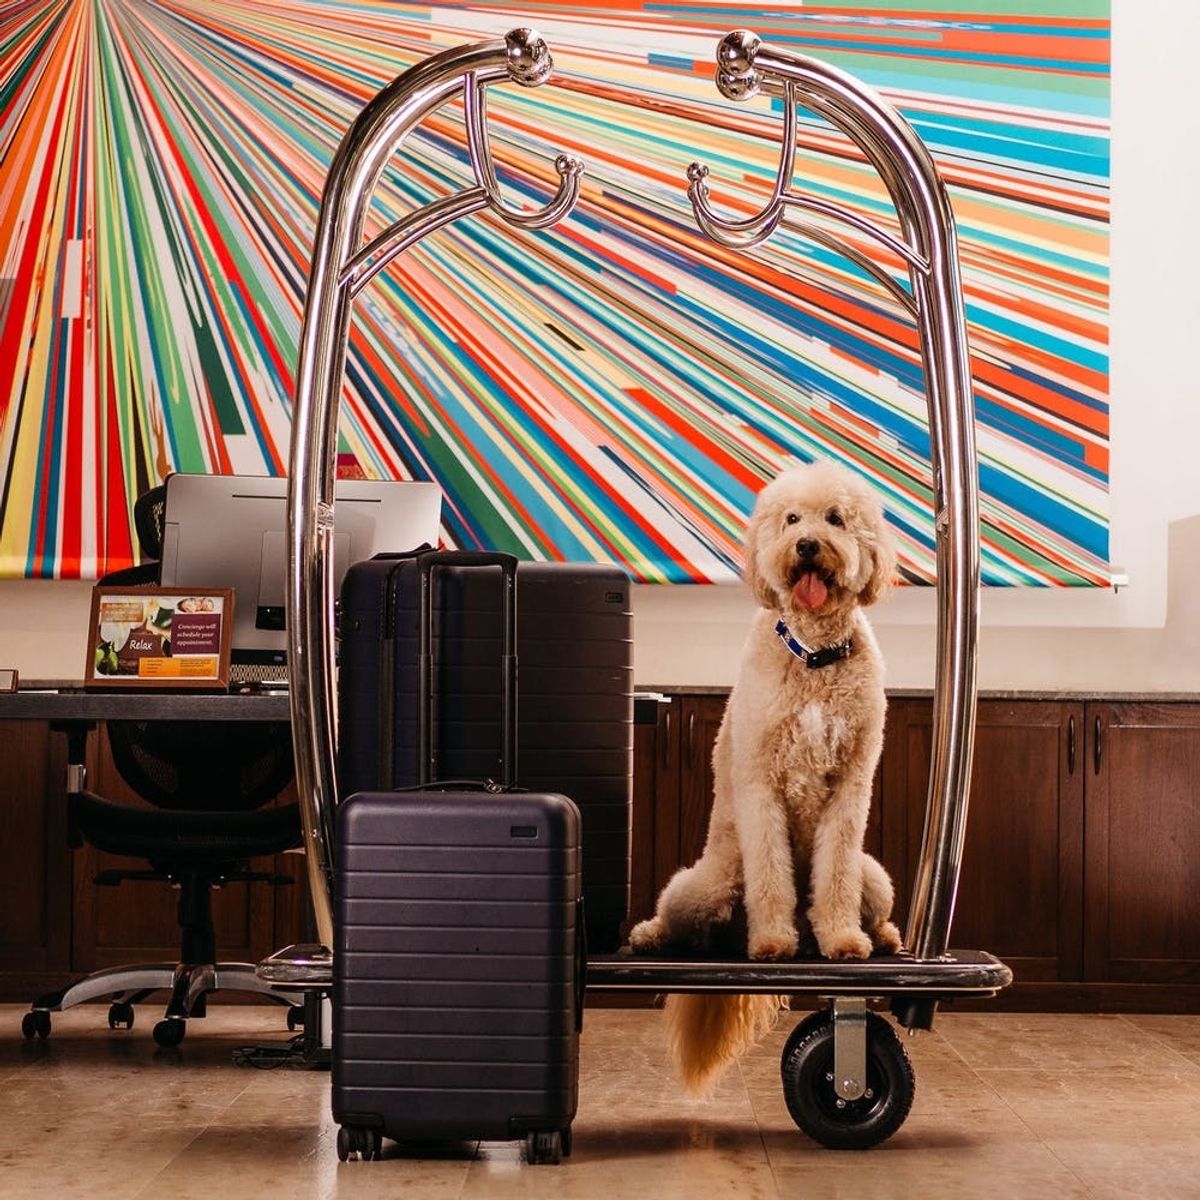 The 9 Most Pet-Friendly Hotels in the US